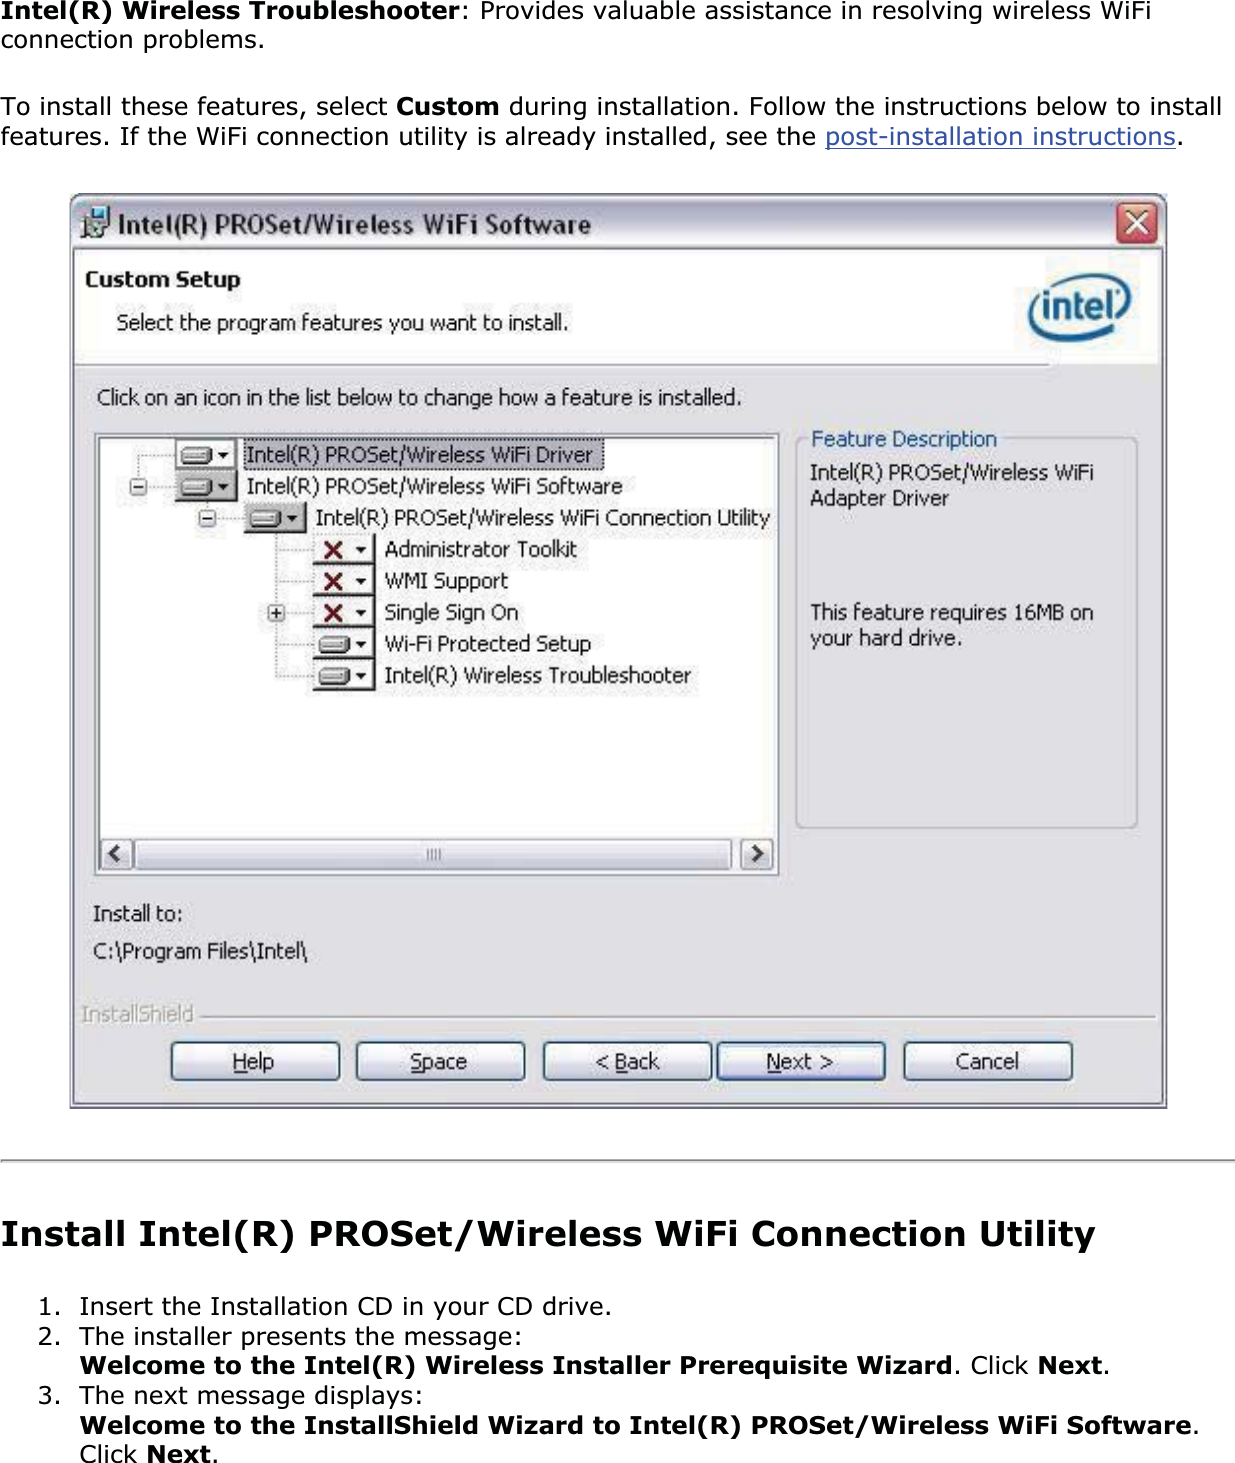 Intel(R) Wireless Troubleshooter: Provides valuable assistance in resolving wireless WiFi connection problems. To install these features, select Custom during installation. Follow the instructions below to install features. If the WiFi connection utility is already installed, see the post-installation instructions.Install Intel(R) PROSet/Wireless WiFi Connection Utility1. Insert the Installation CD in your CD drive.2. The installer presents the message: Welcome to the Intel(R) Wireless Installer Prerequisite Wizard. Click Next.3. The next message displays: Welcome to the InstallShield Wizard to Intel(R) PROSet/Wireless WiFi Software.Click Next.